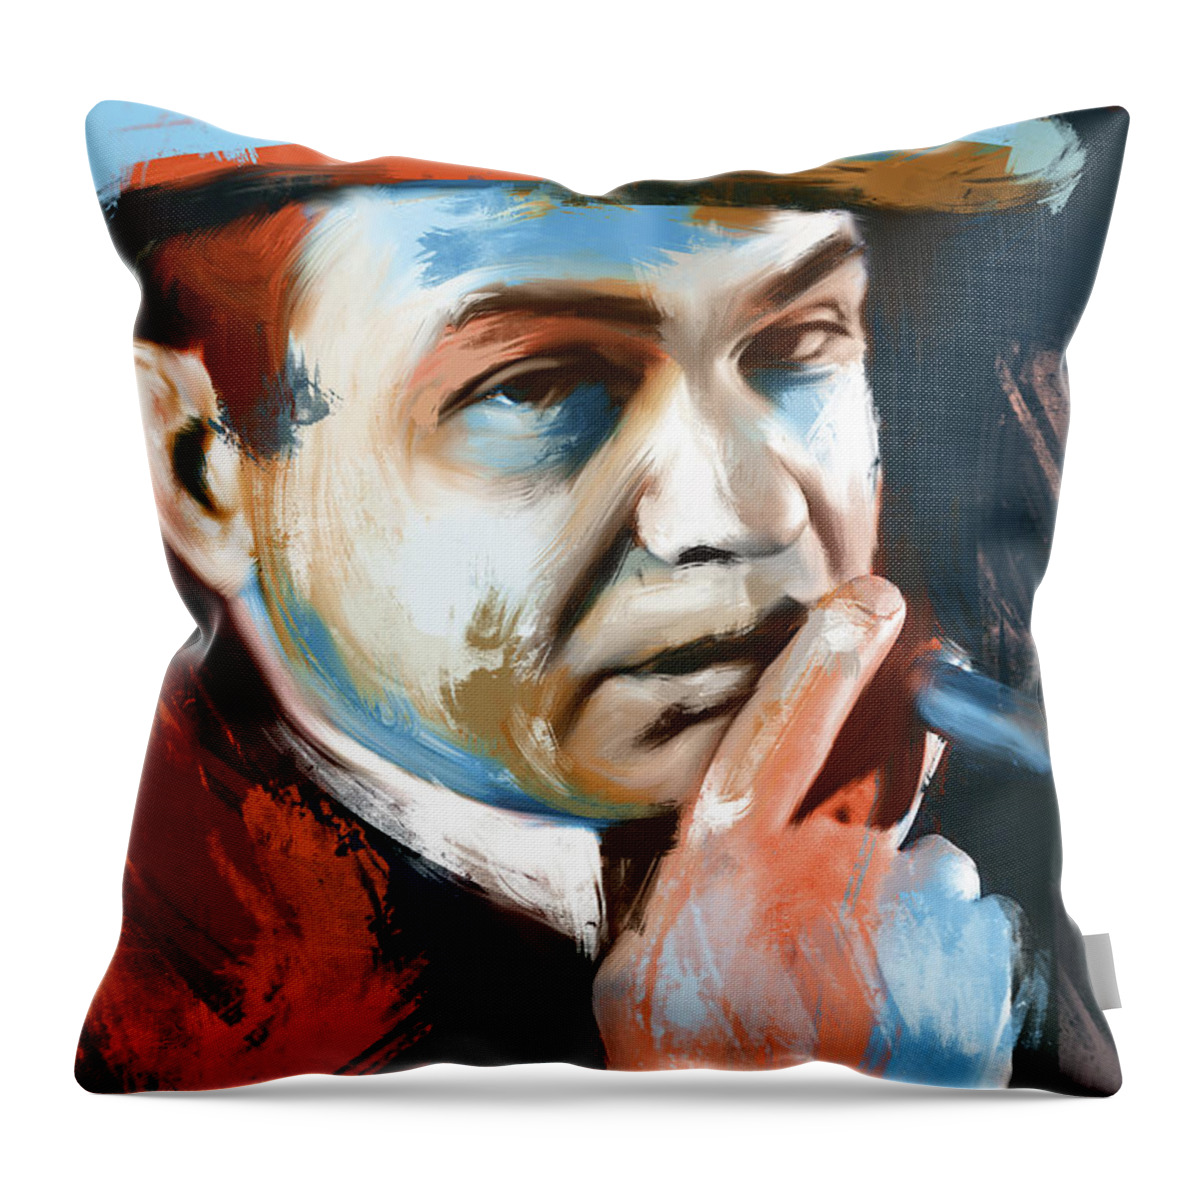 Edward Throw Pillow featuring the painting Edward G. Robinson by Stars on Art